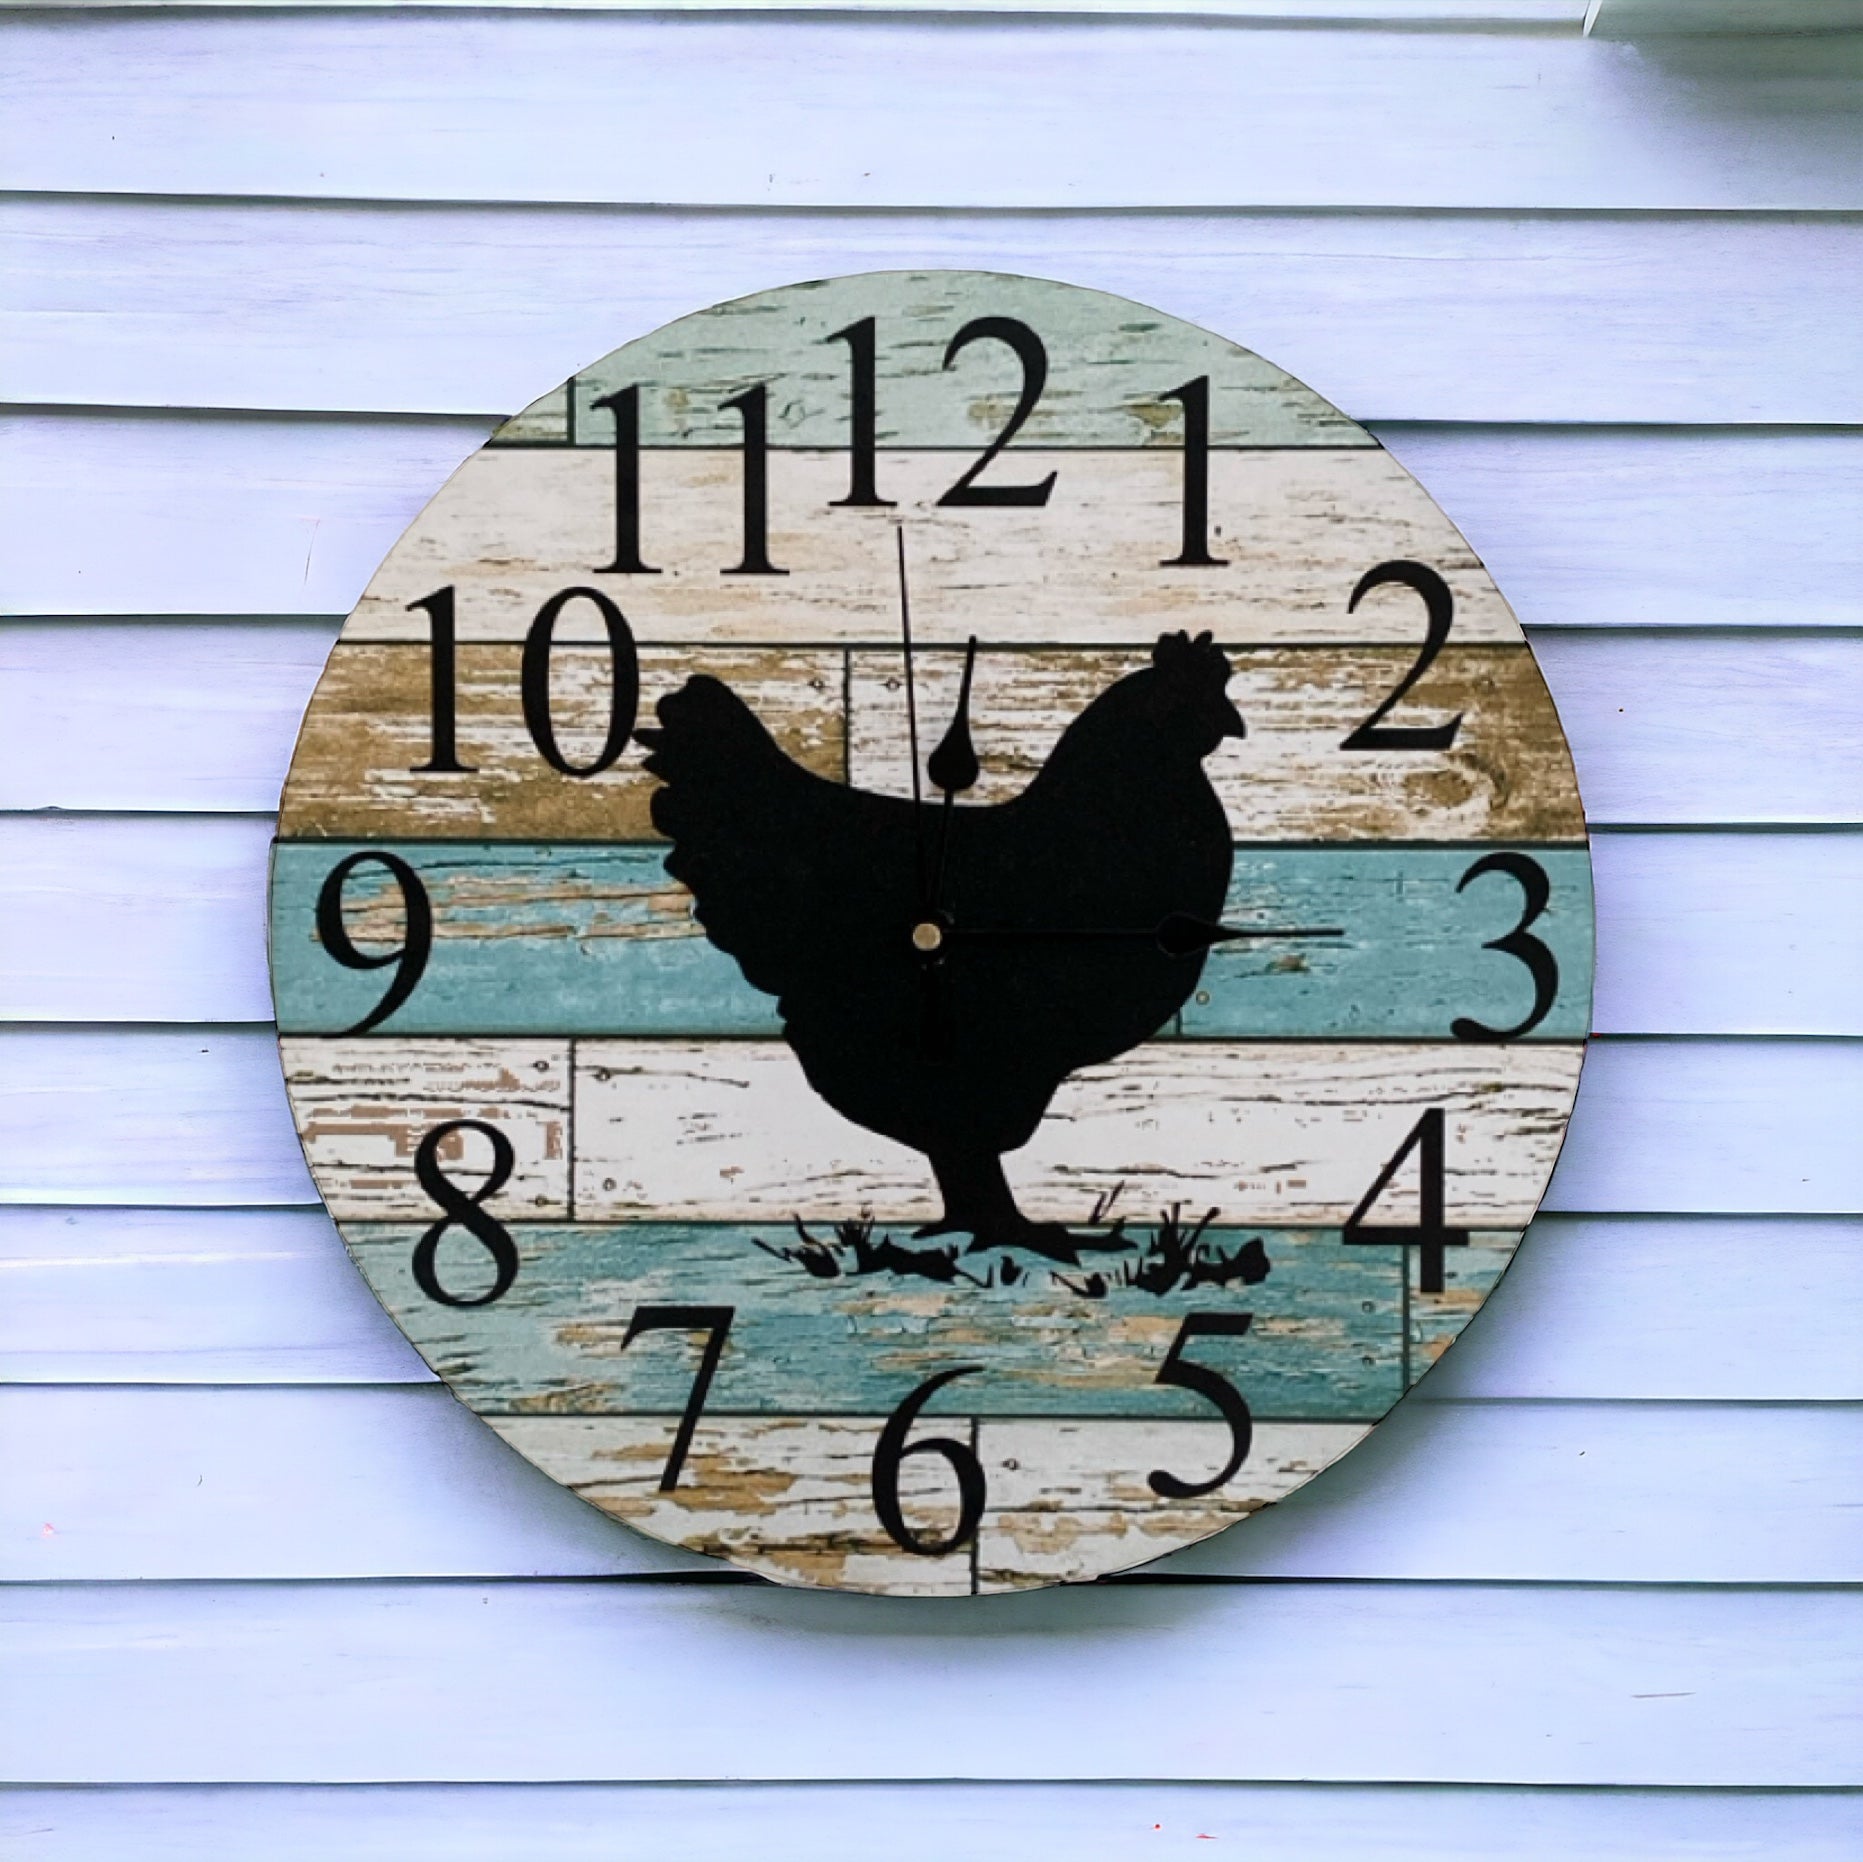 Clock Wall Farmhouse Chicken Aussie Made - The Renmy Store Homewares & Gifts 